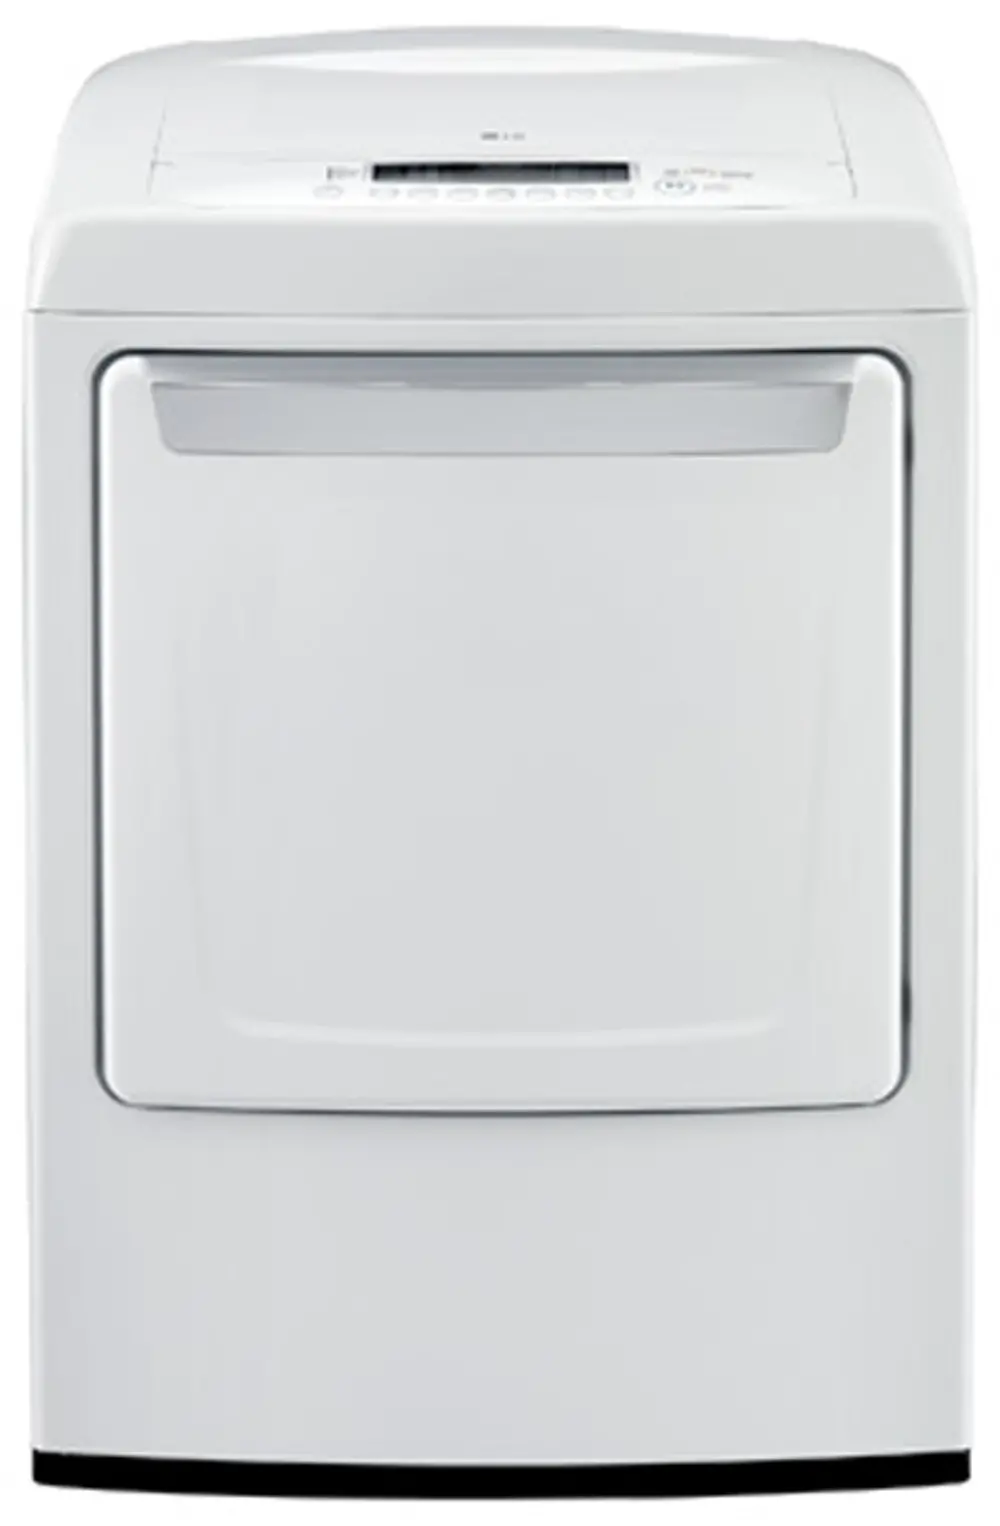 DLE1101W LG 7.3 Cu. Ft. Ultra Large Capacity Top Load Dryer - White-1